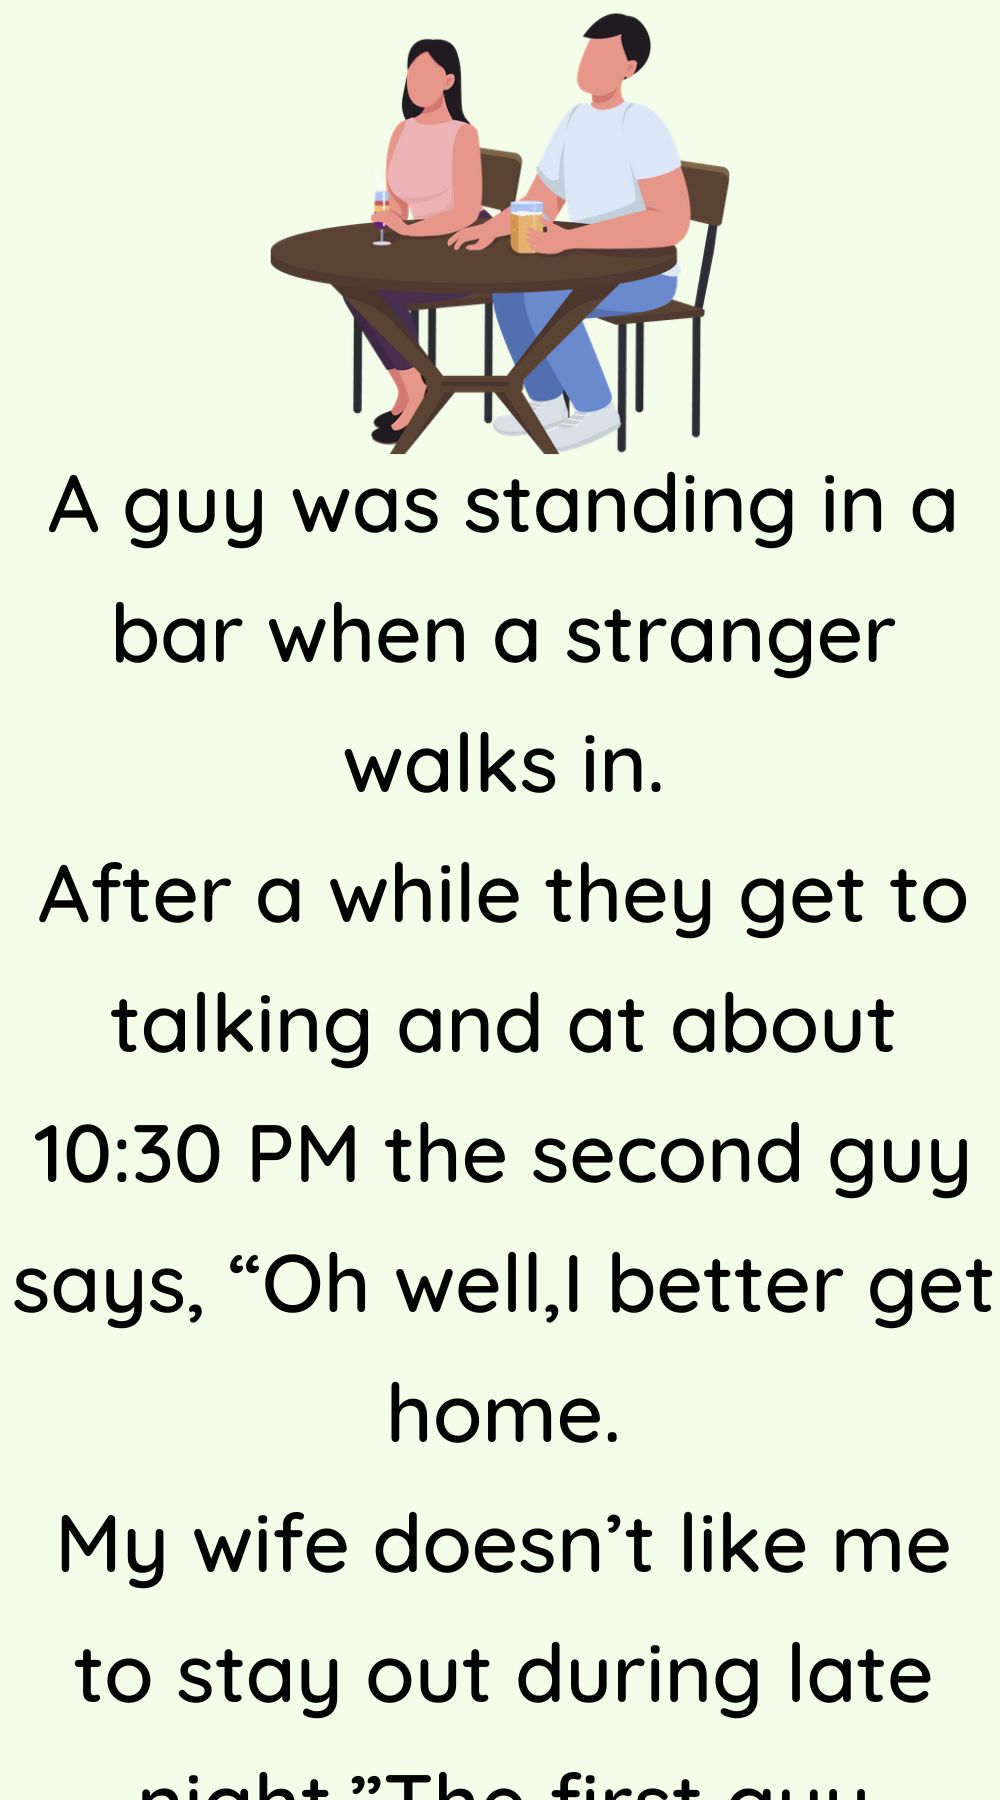 A guy was standing in a bar when